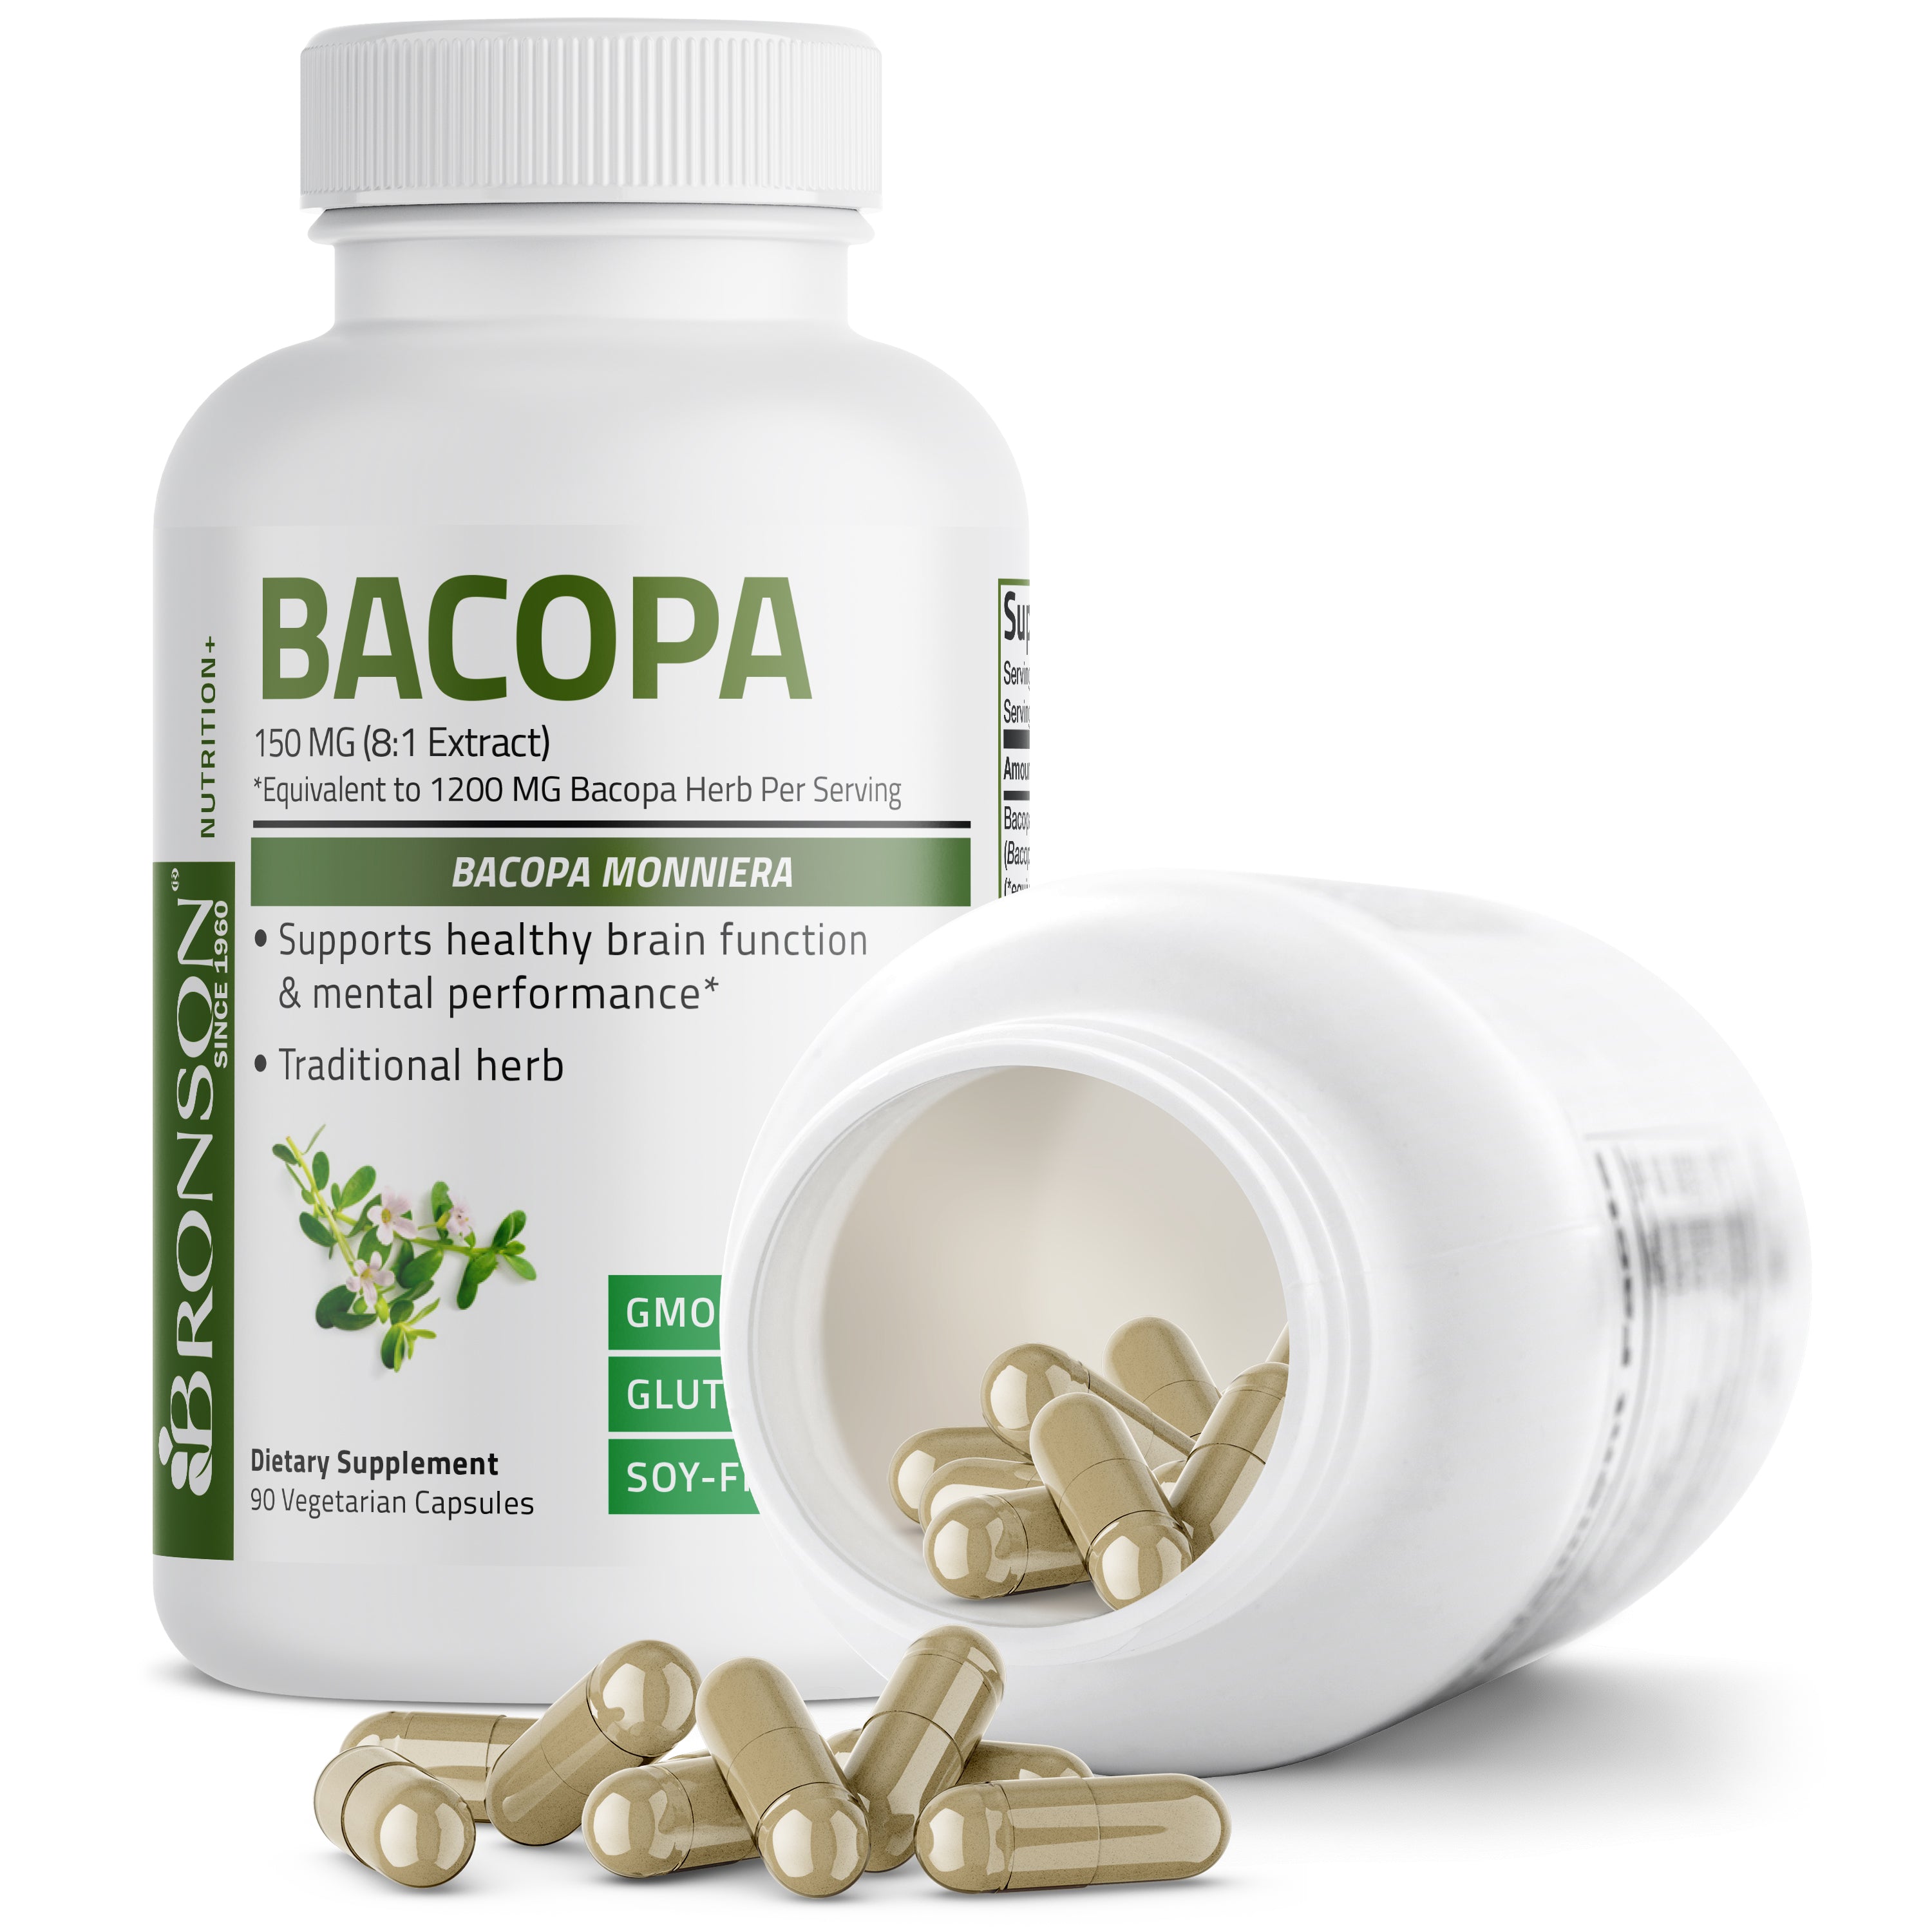 Bacopa 1200 MG view 6 of 7